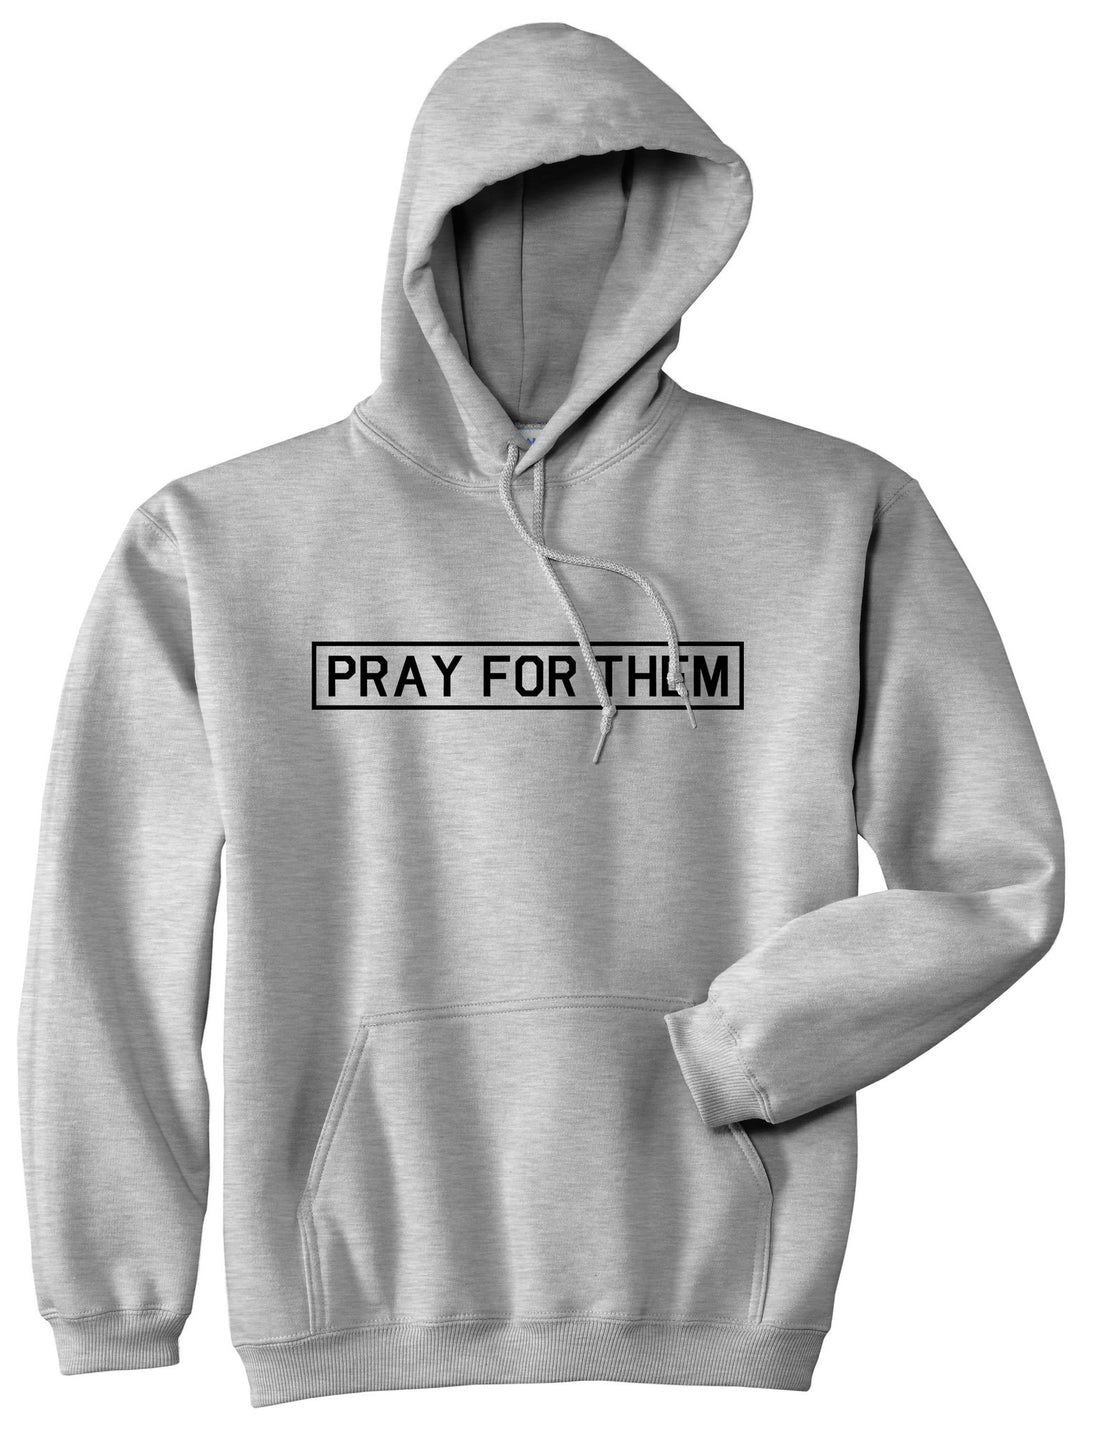 Pray For Them Fall15 Boys Kids Pullover Hoodie Hoody in Grey by Kings Of NY